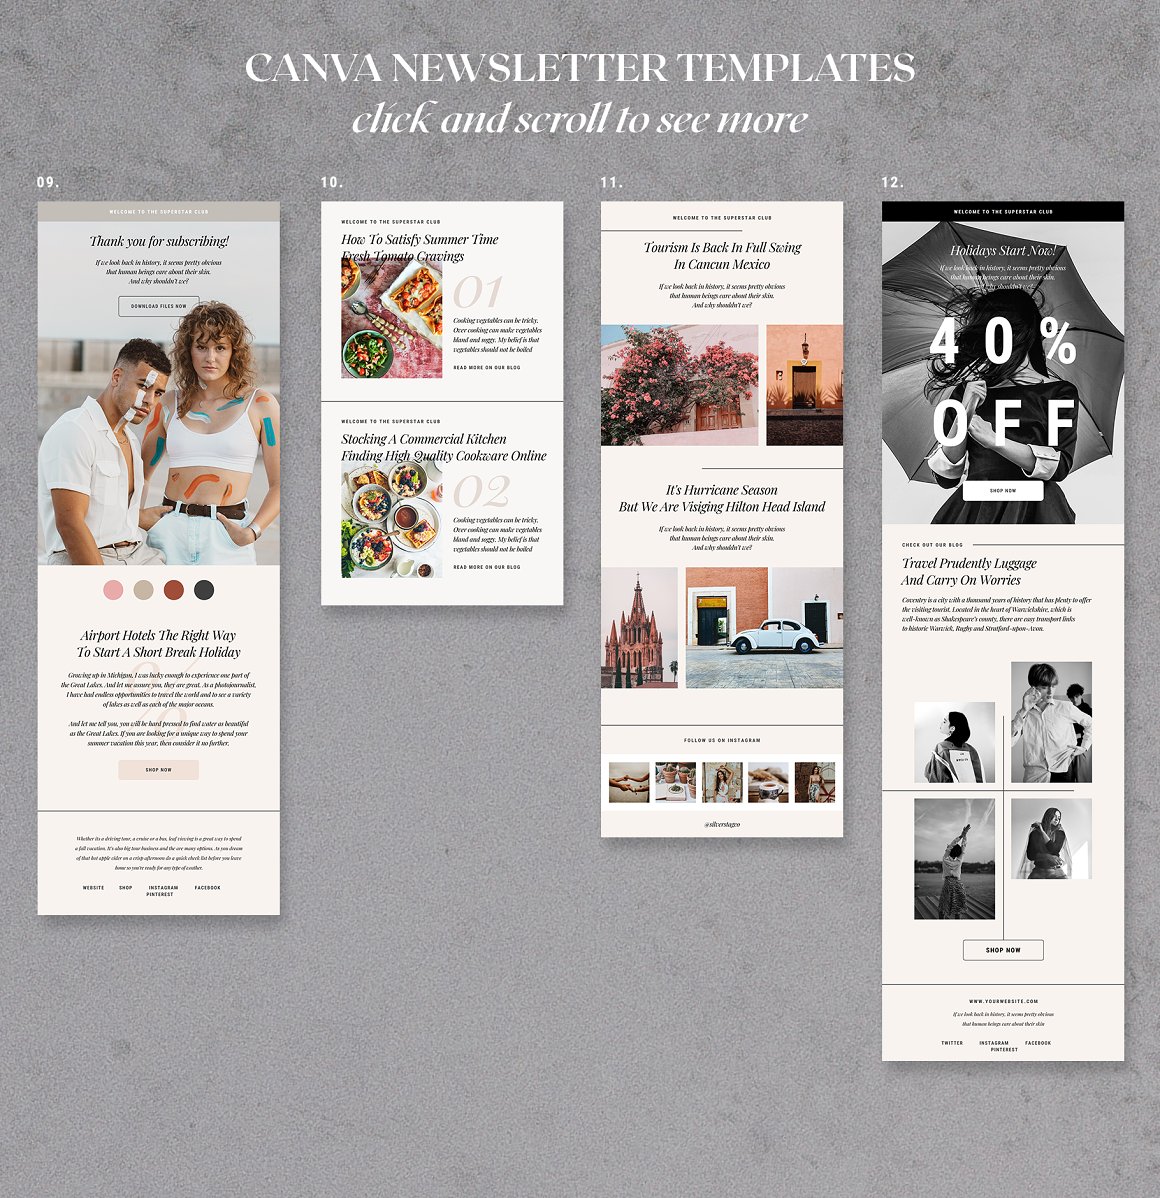 Image collection of amazing newsletter template.